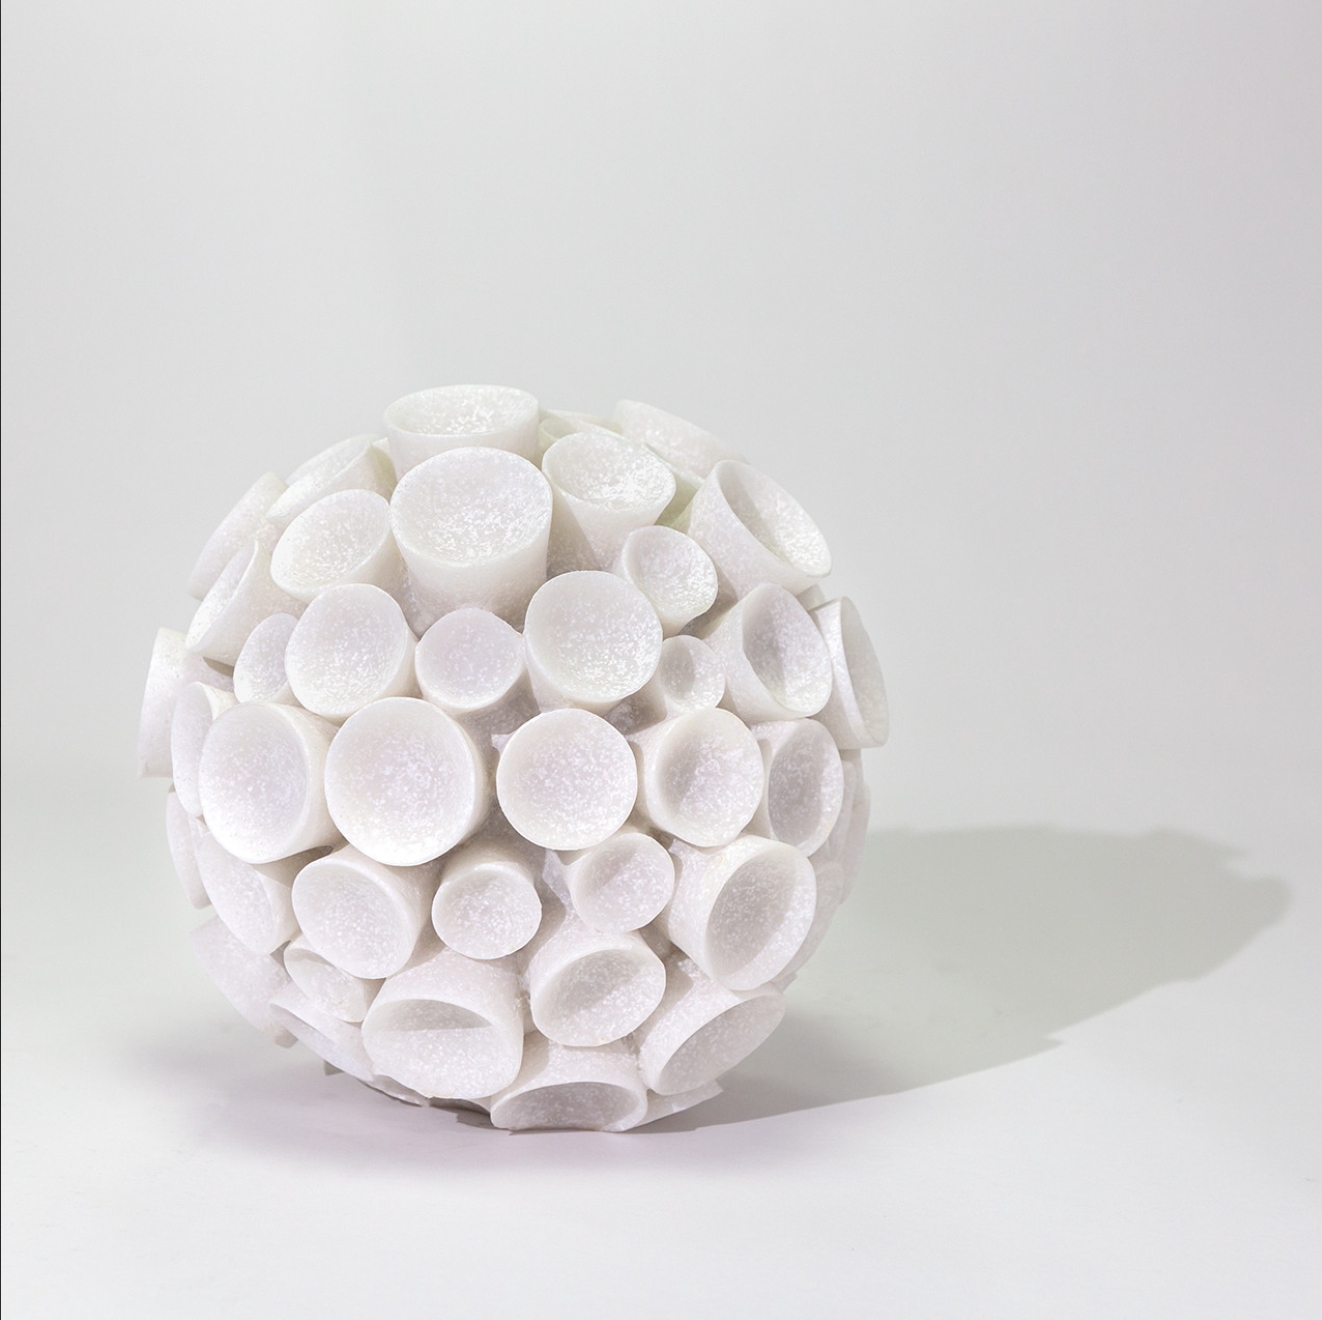 A spherical sculpture composed of numerous Lela coral statuary elements against a light grey background, casting a soft shadow in Scottsdale Arizona. (from The Import Collection)